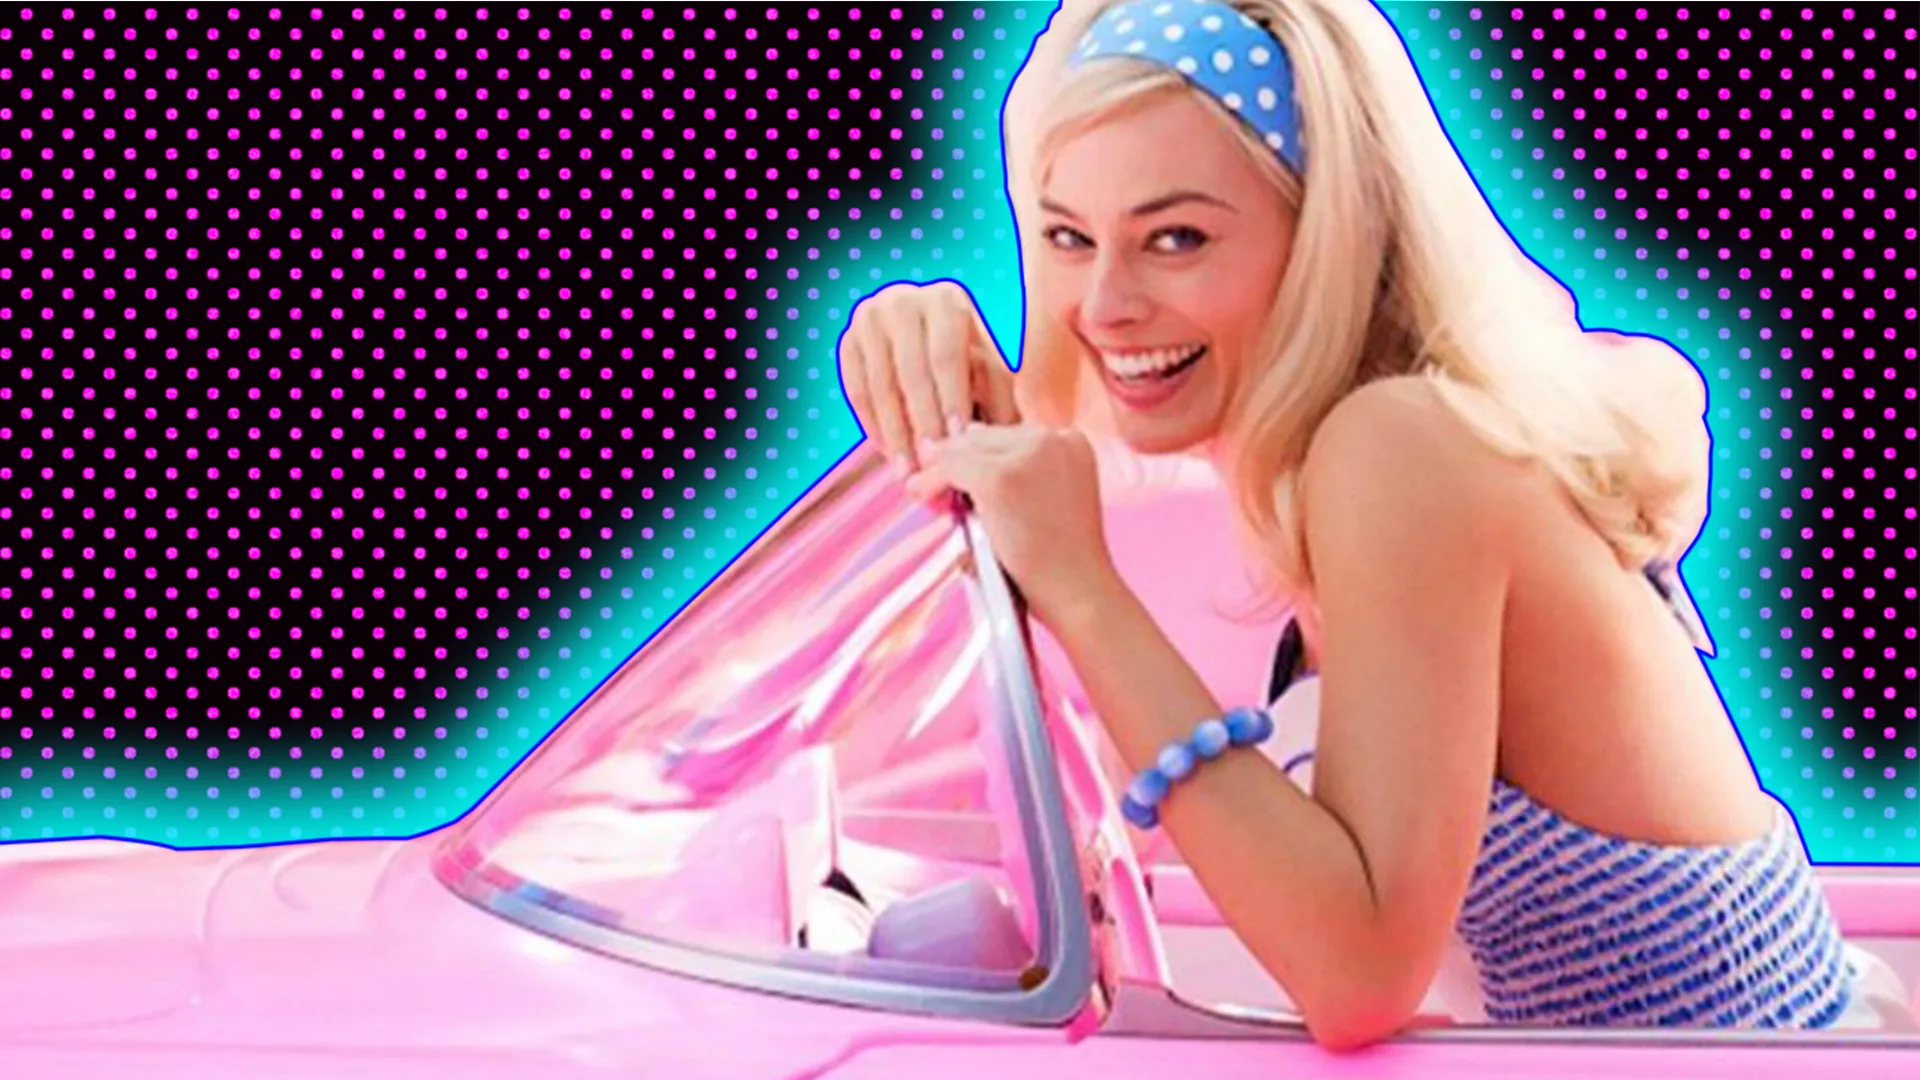 Margot Robbie as Barbie outlined by a light blue halo effect on a black and pink spotty background